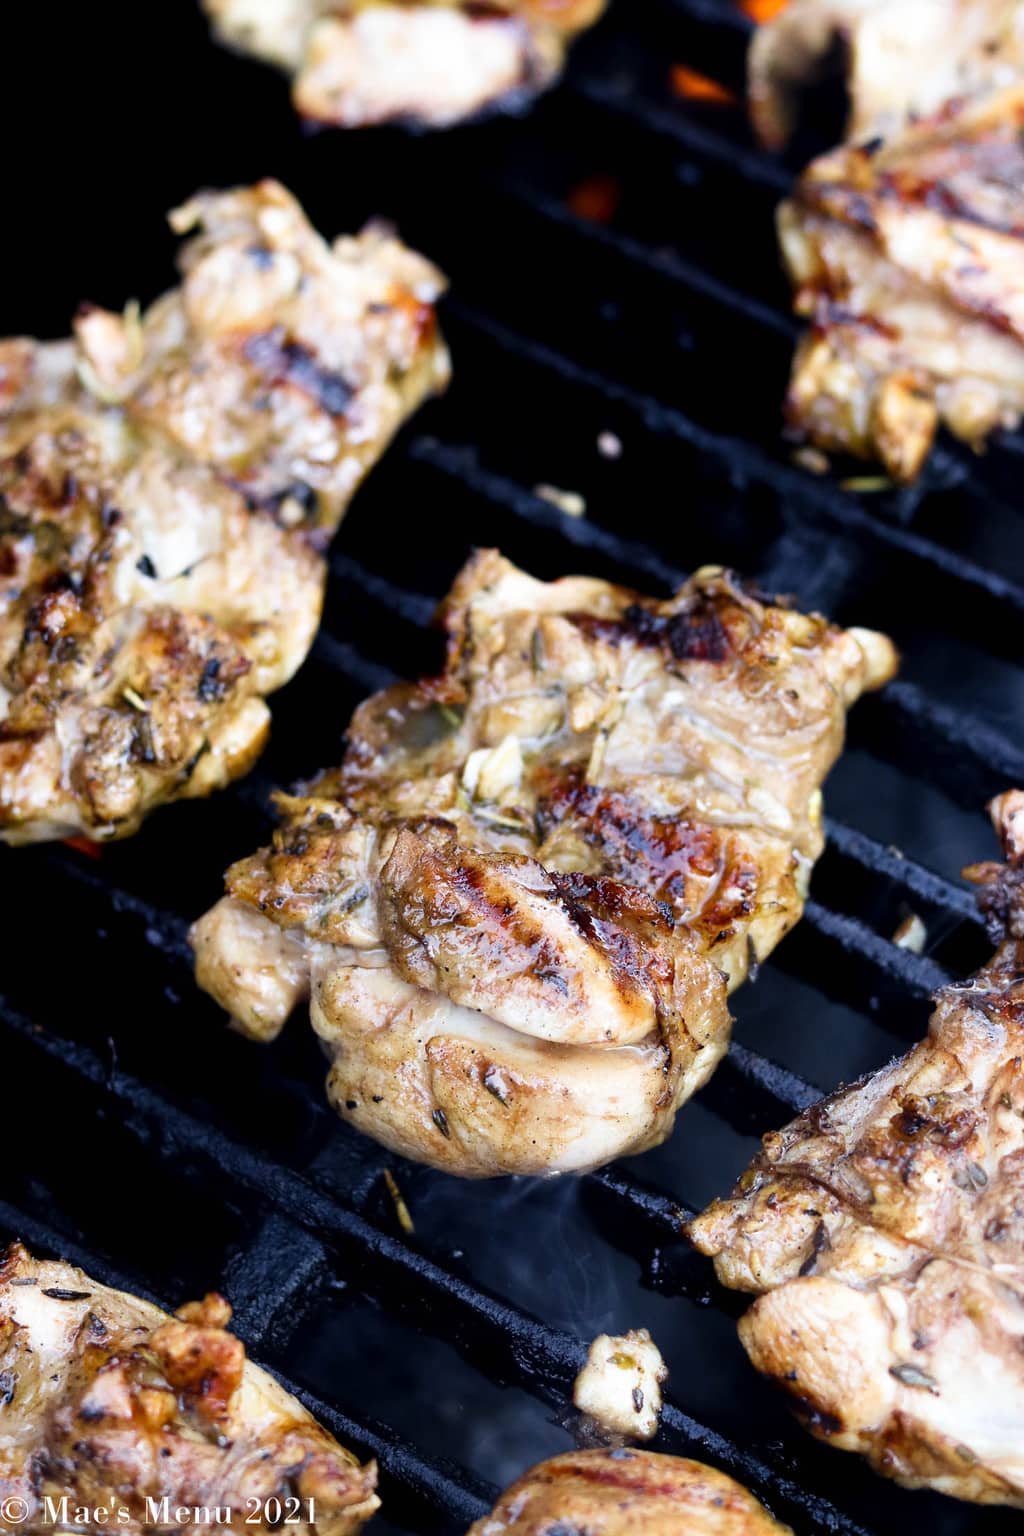 Marinated chicken thighs on the grill